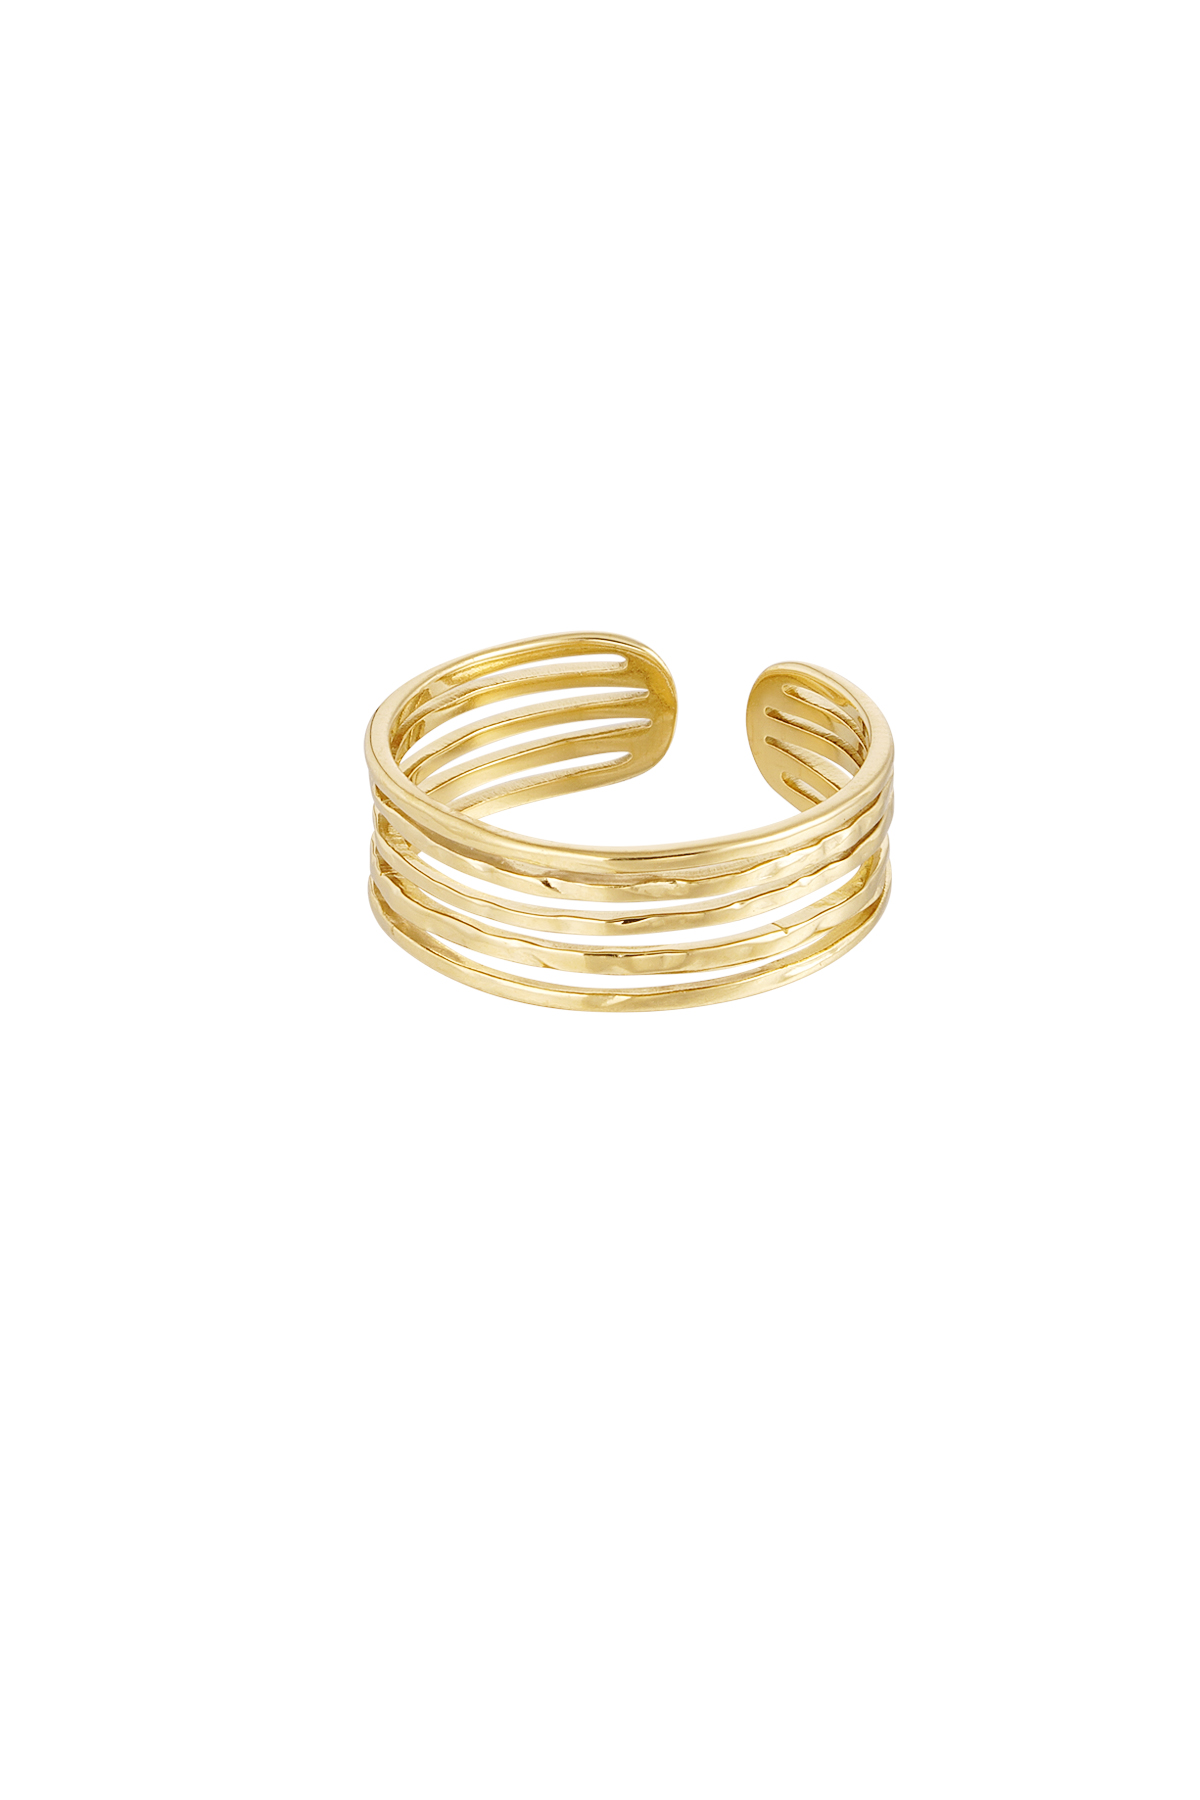 Ring 5 thin layers - gold h5 